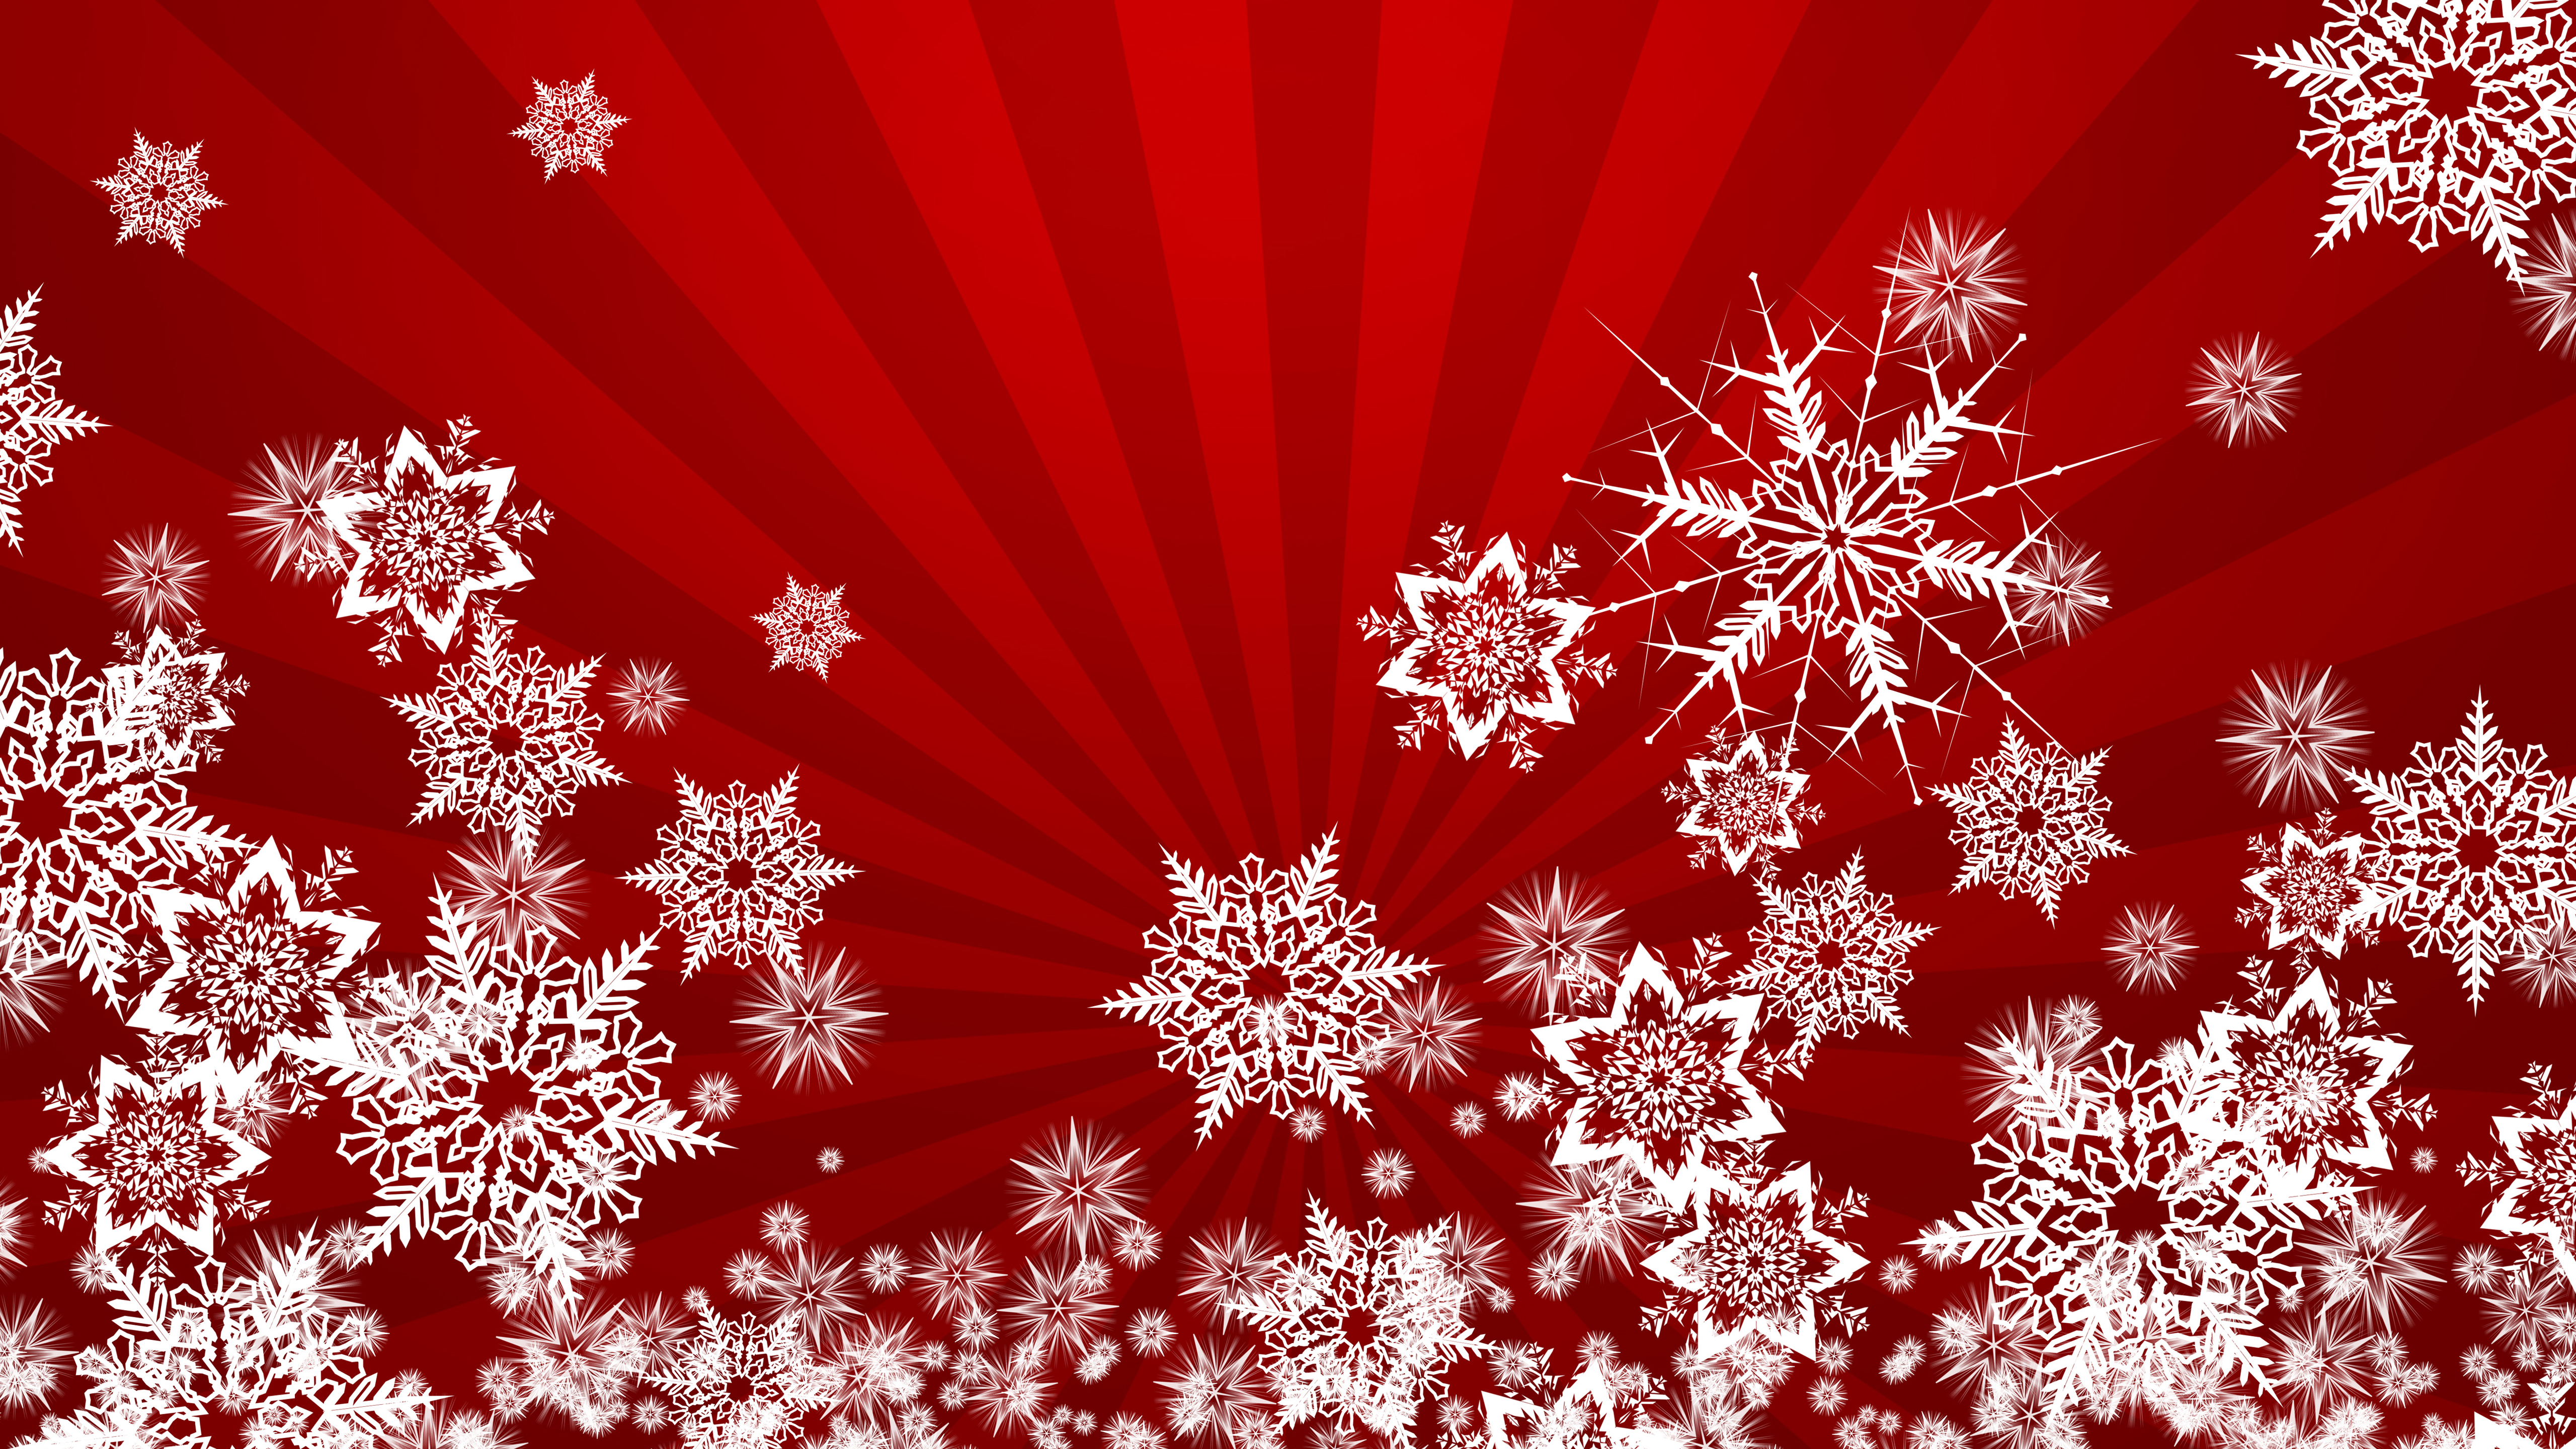 General 5120x2880 abstract snowflakes digital art stripes red vector